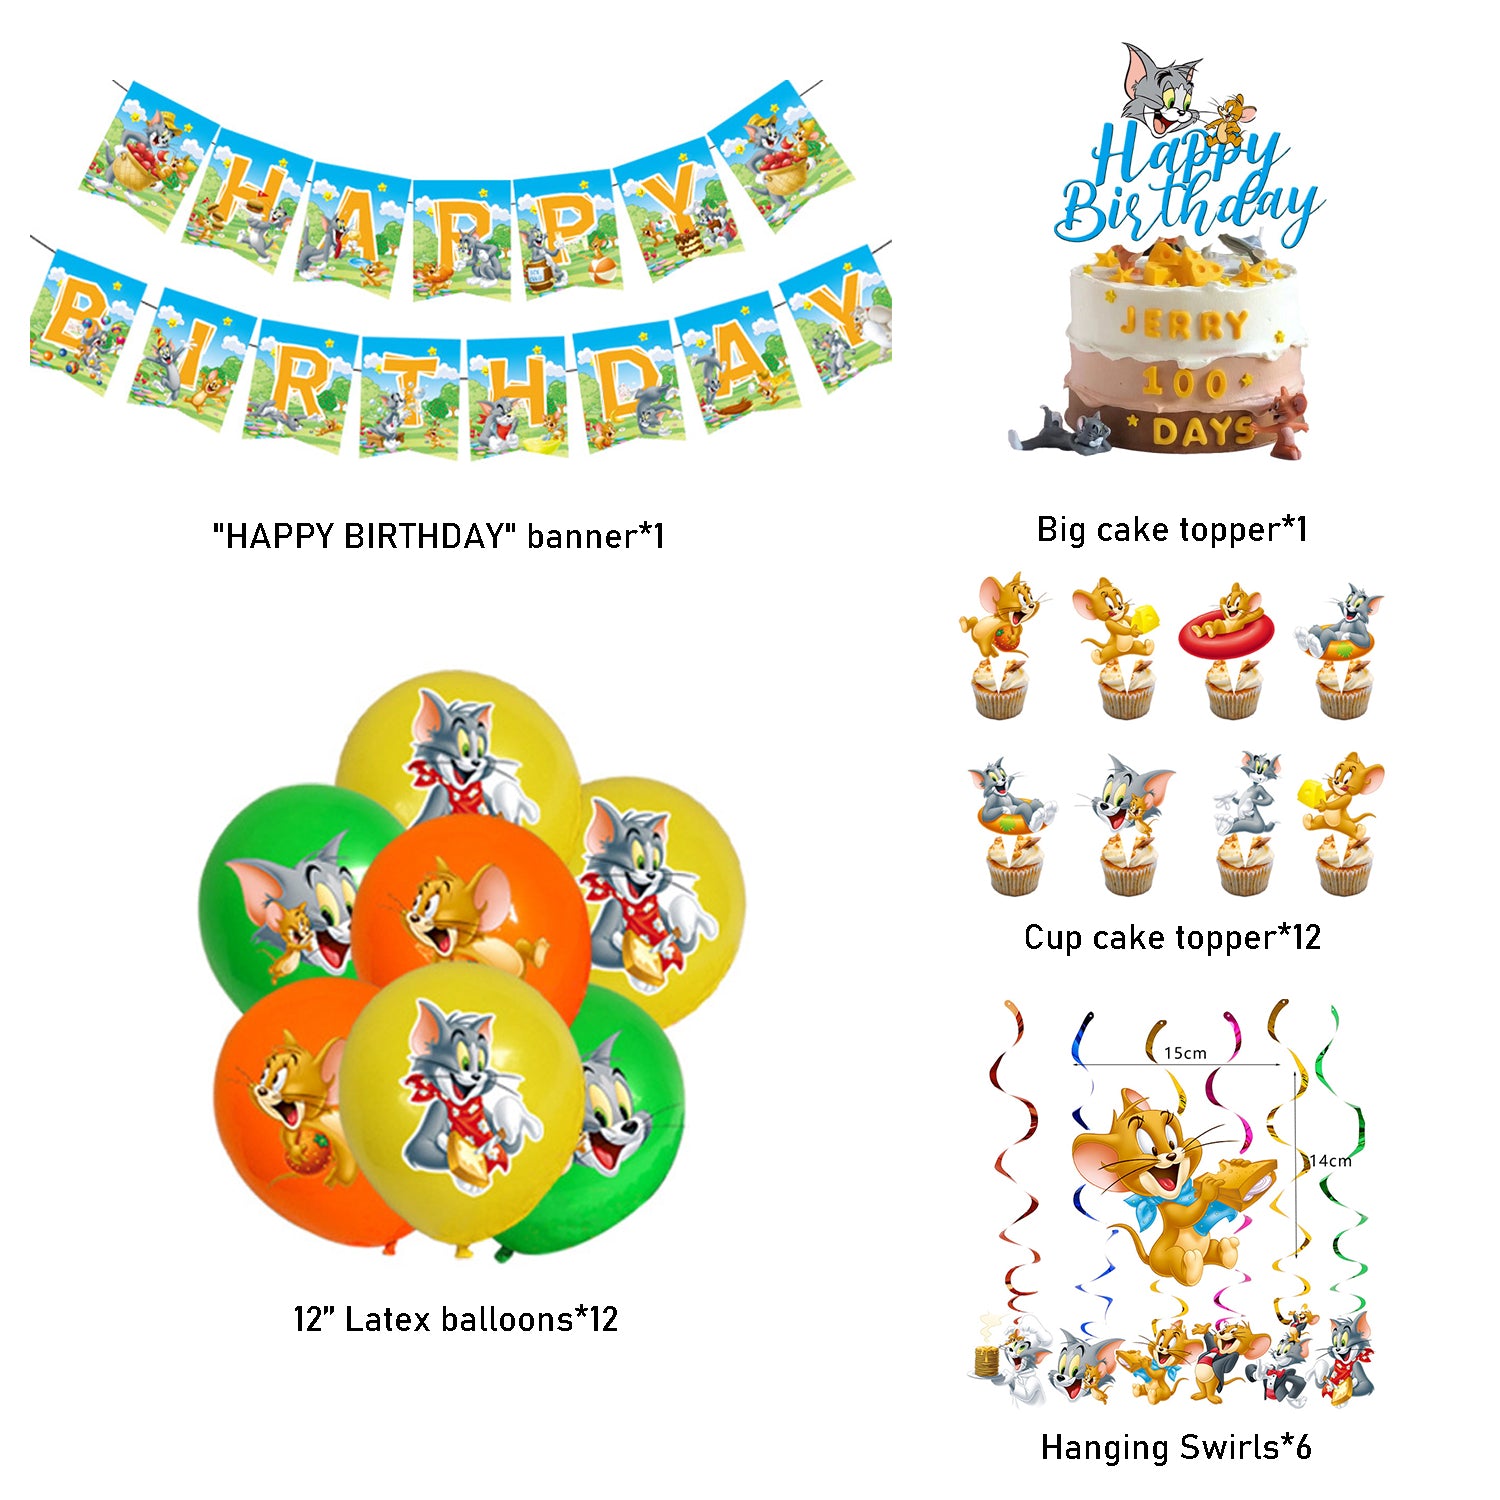 Tom and Jerry Birthday Party Decorations.